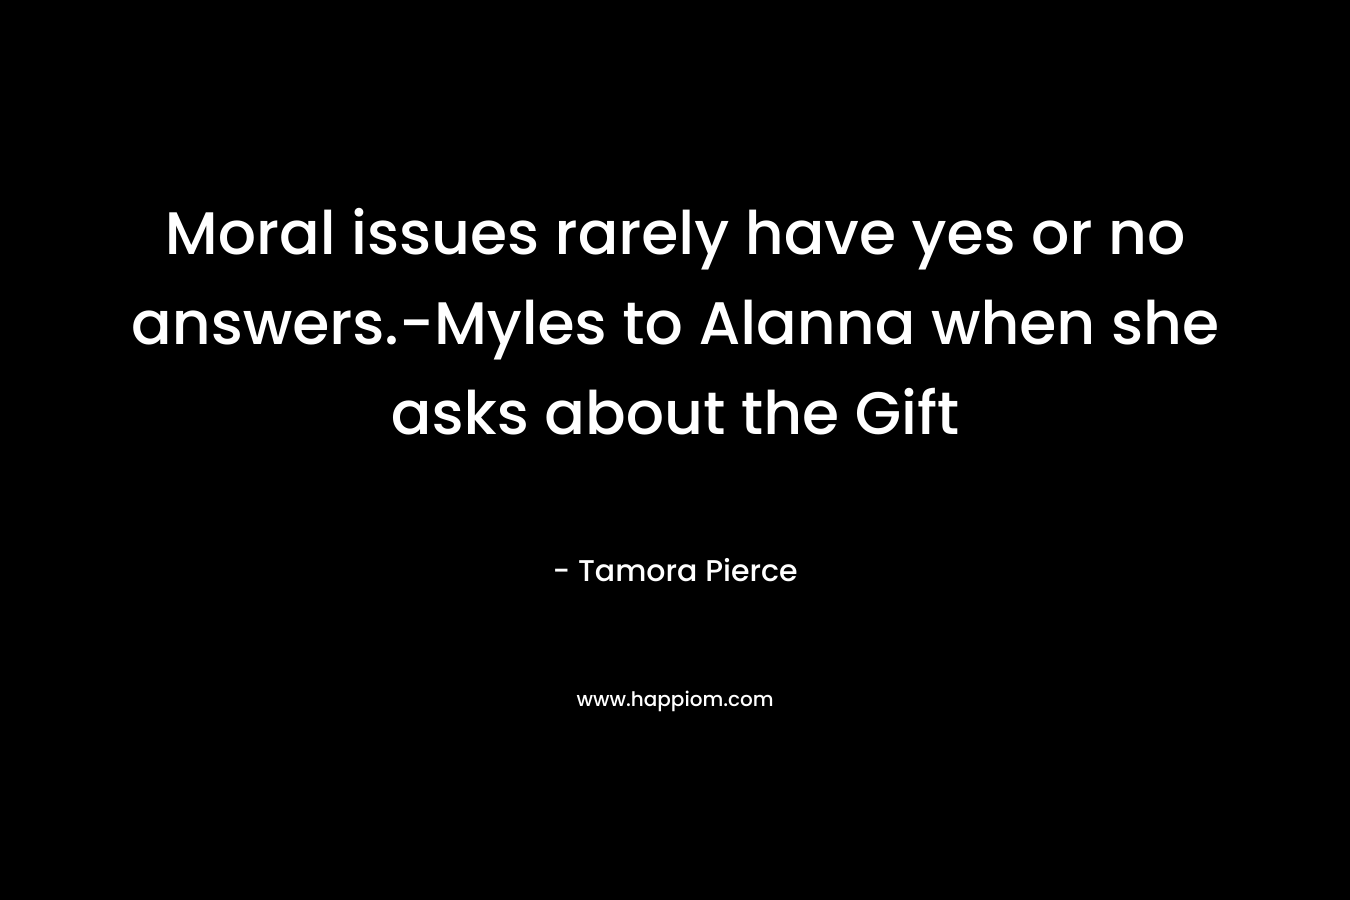 Moral issues rarely have yes or no answers.-Myles to Alanna when she asks about the Gift